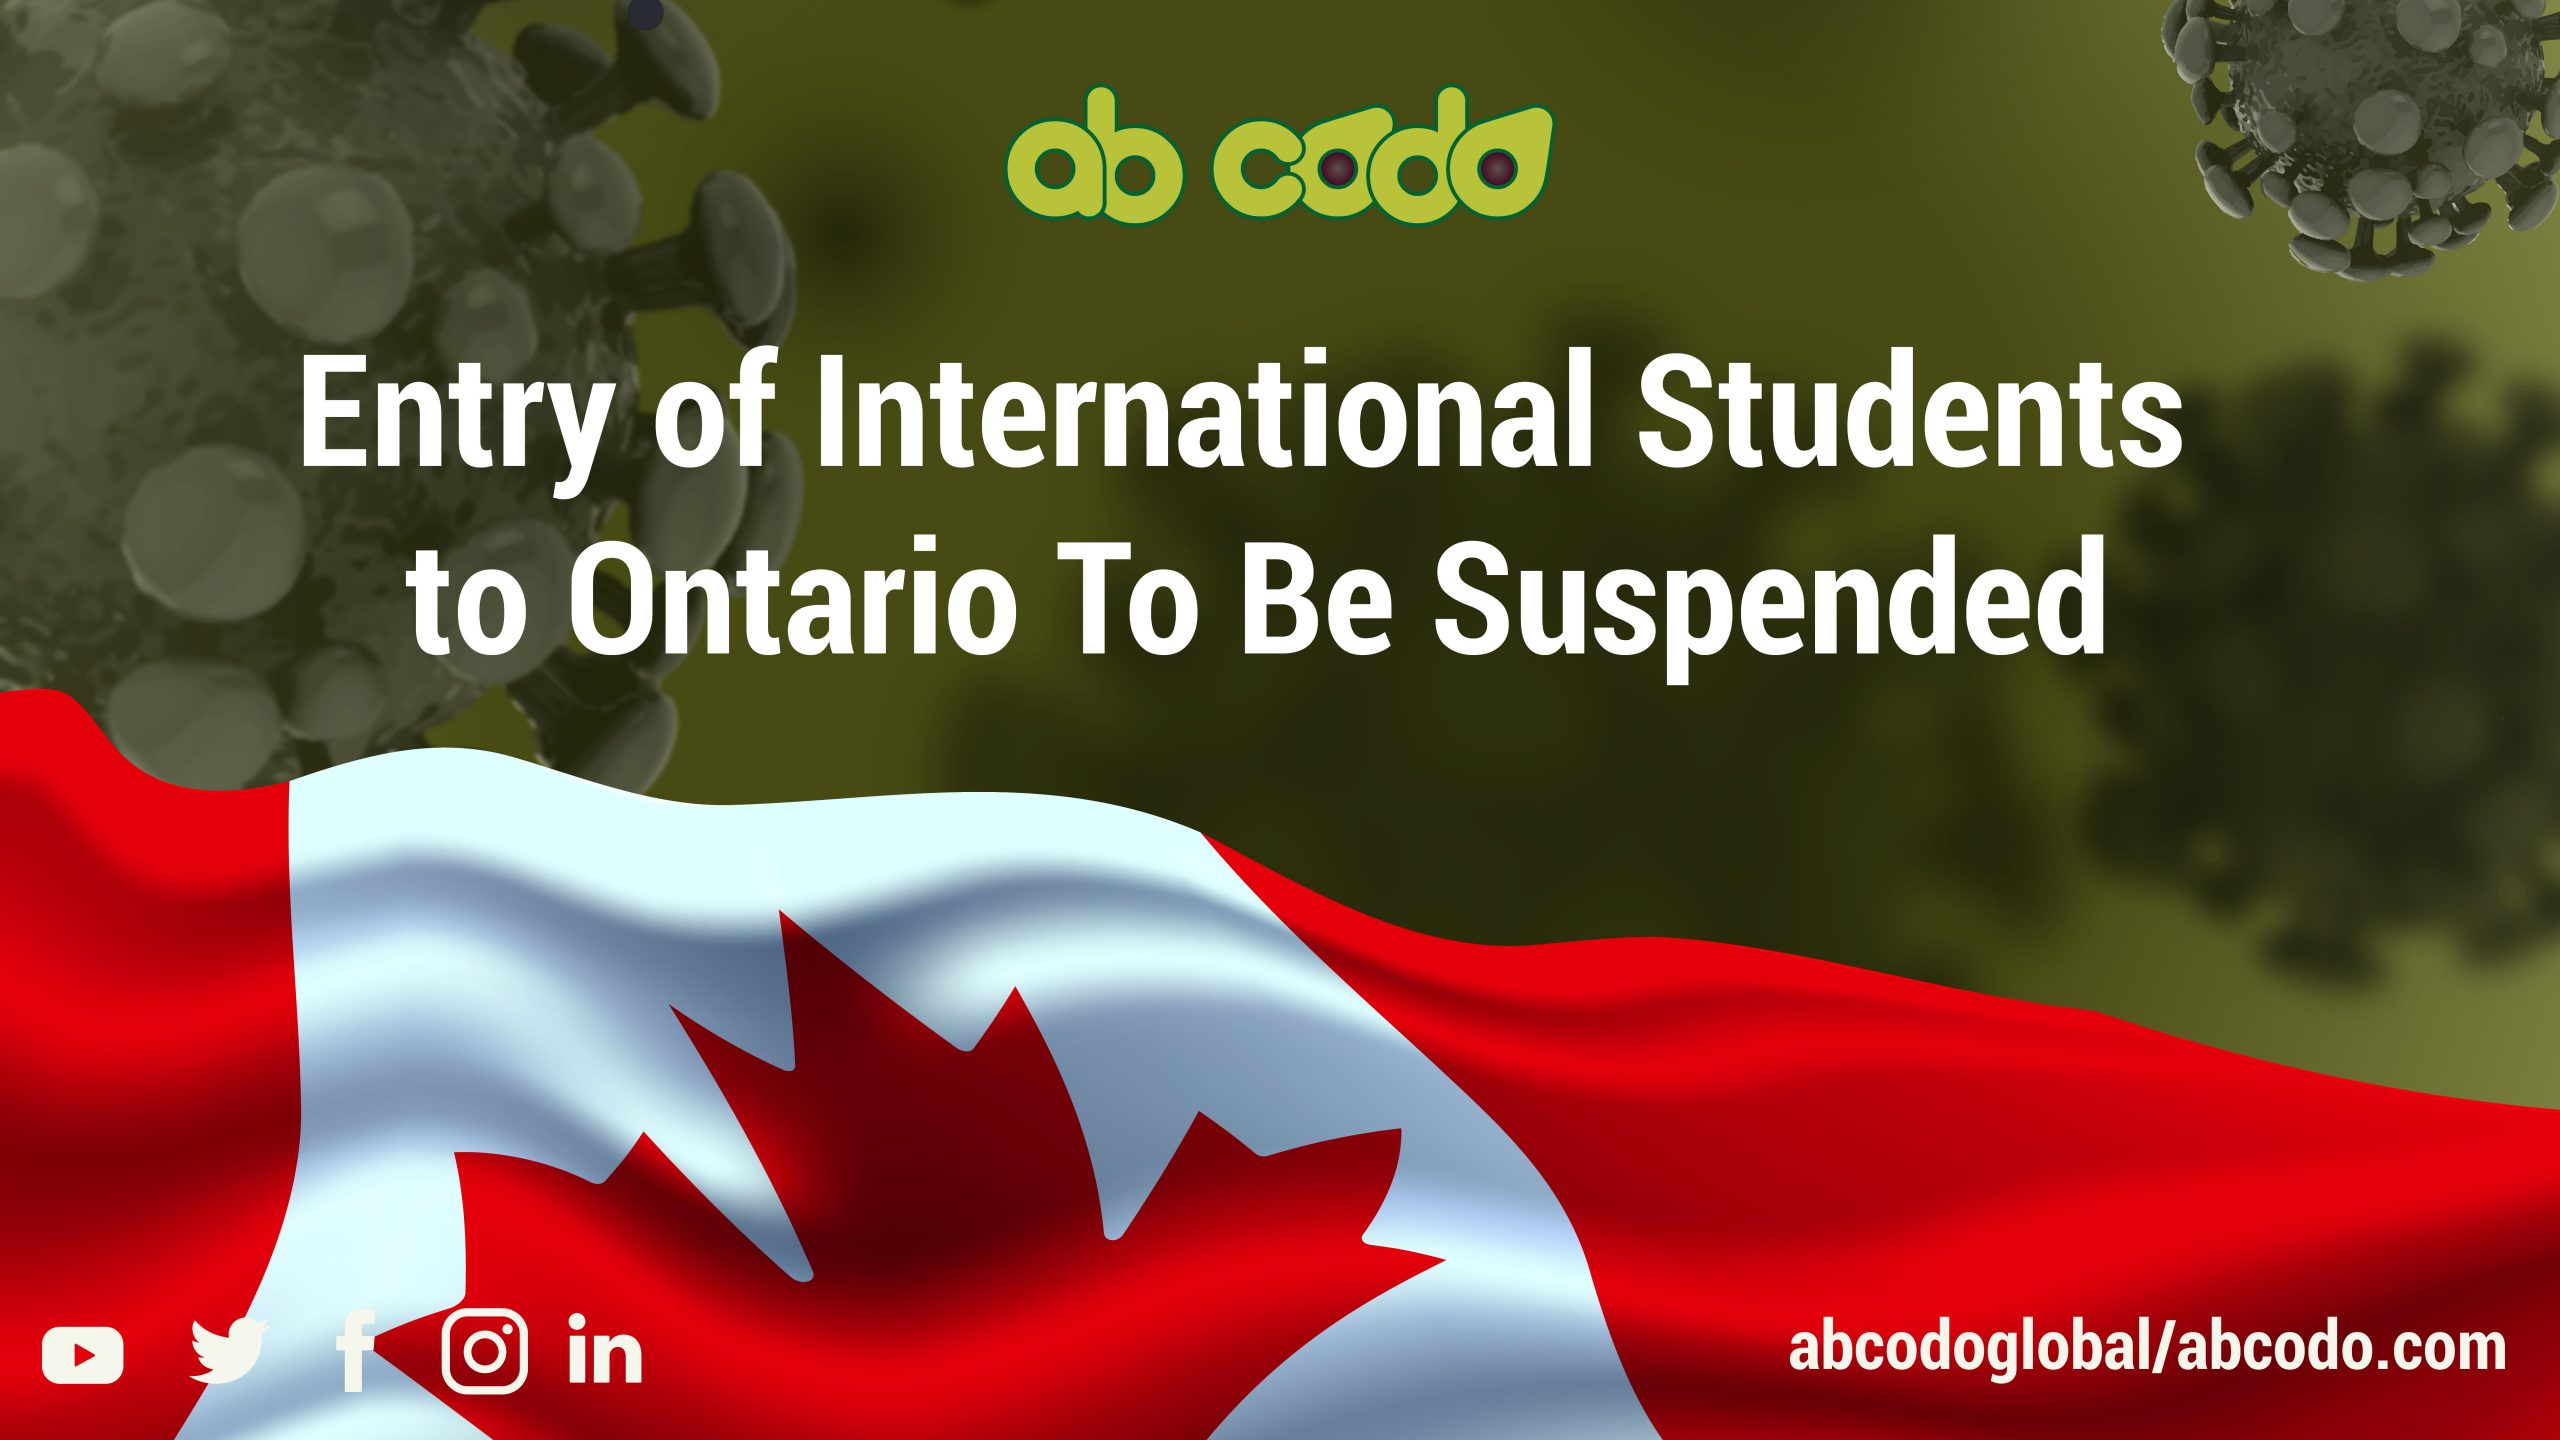 entry of international students are suspended in Ontario, Canada